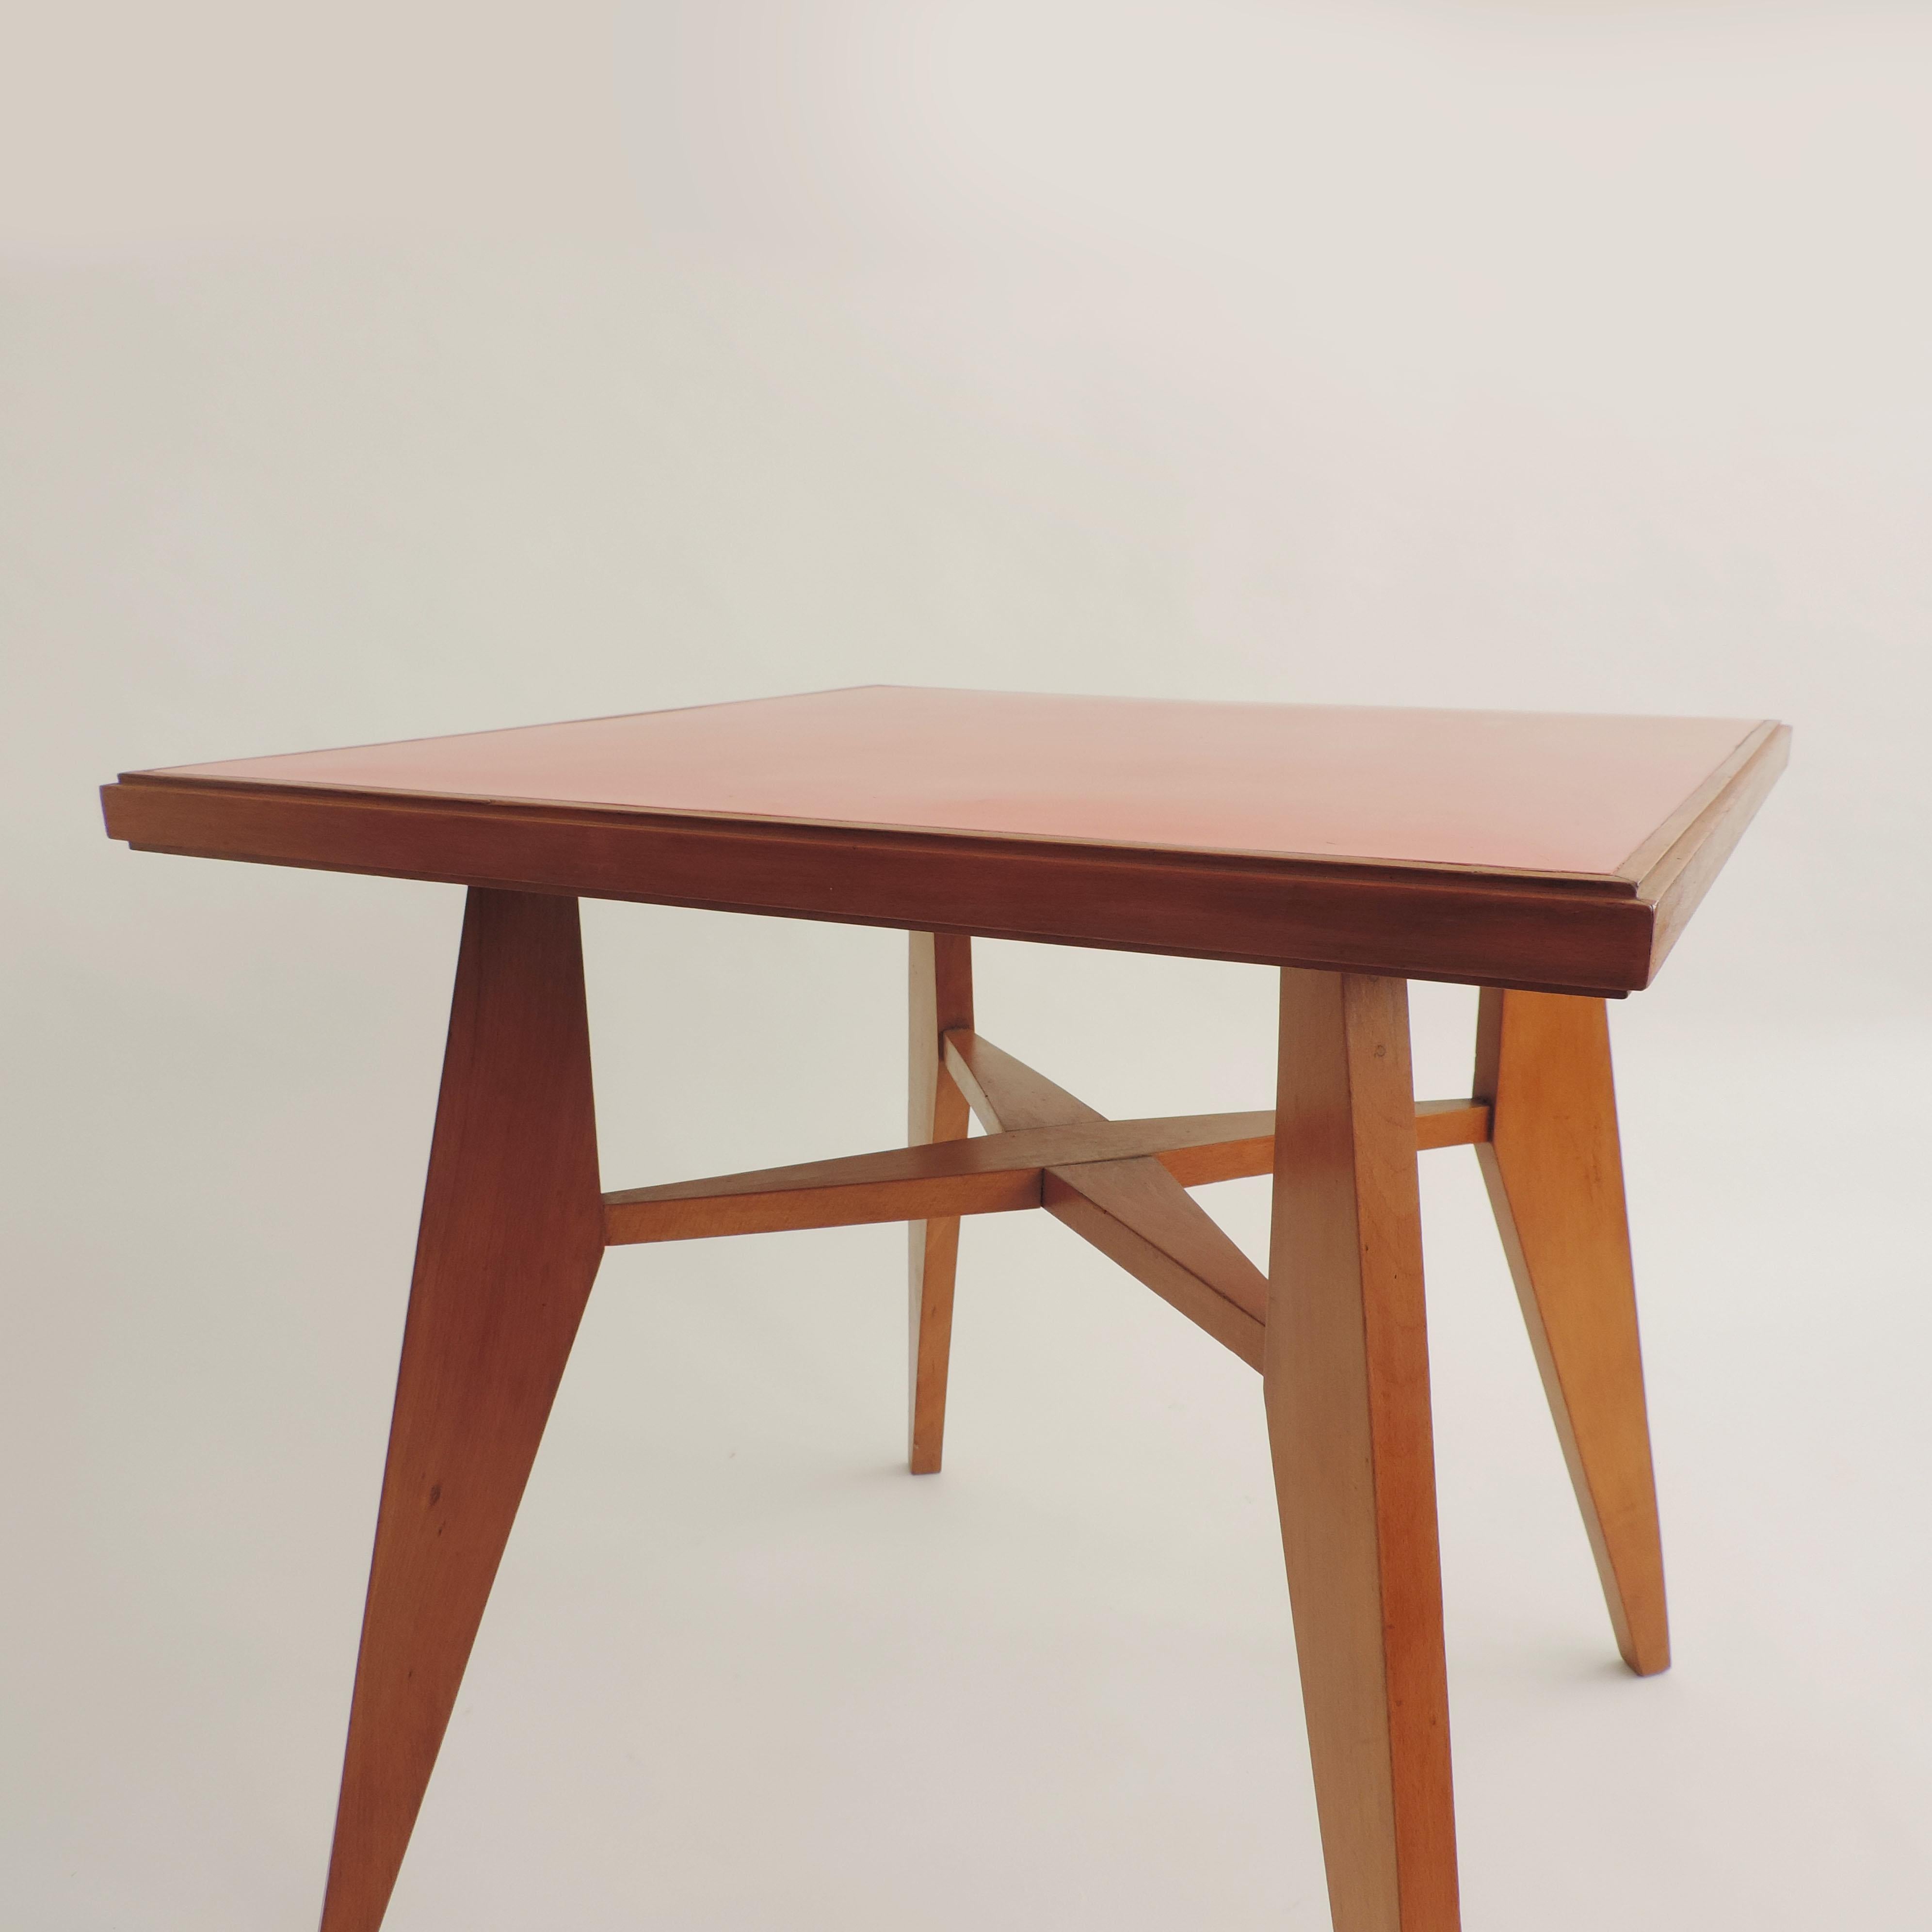 Italian Architectural Square Dining Table with Red Top, Italy, 1950s